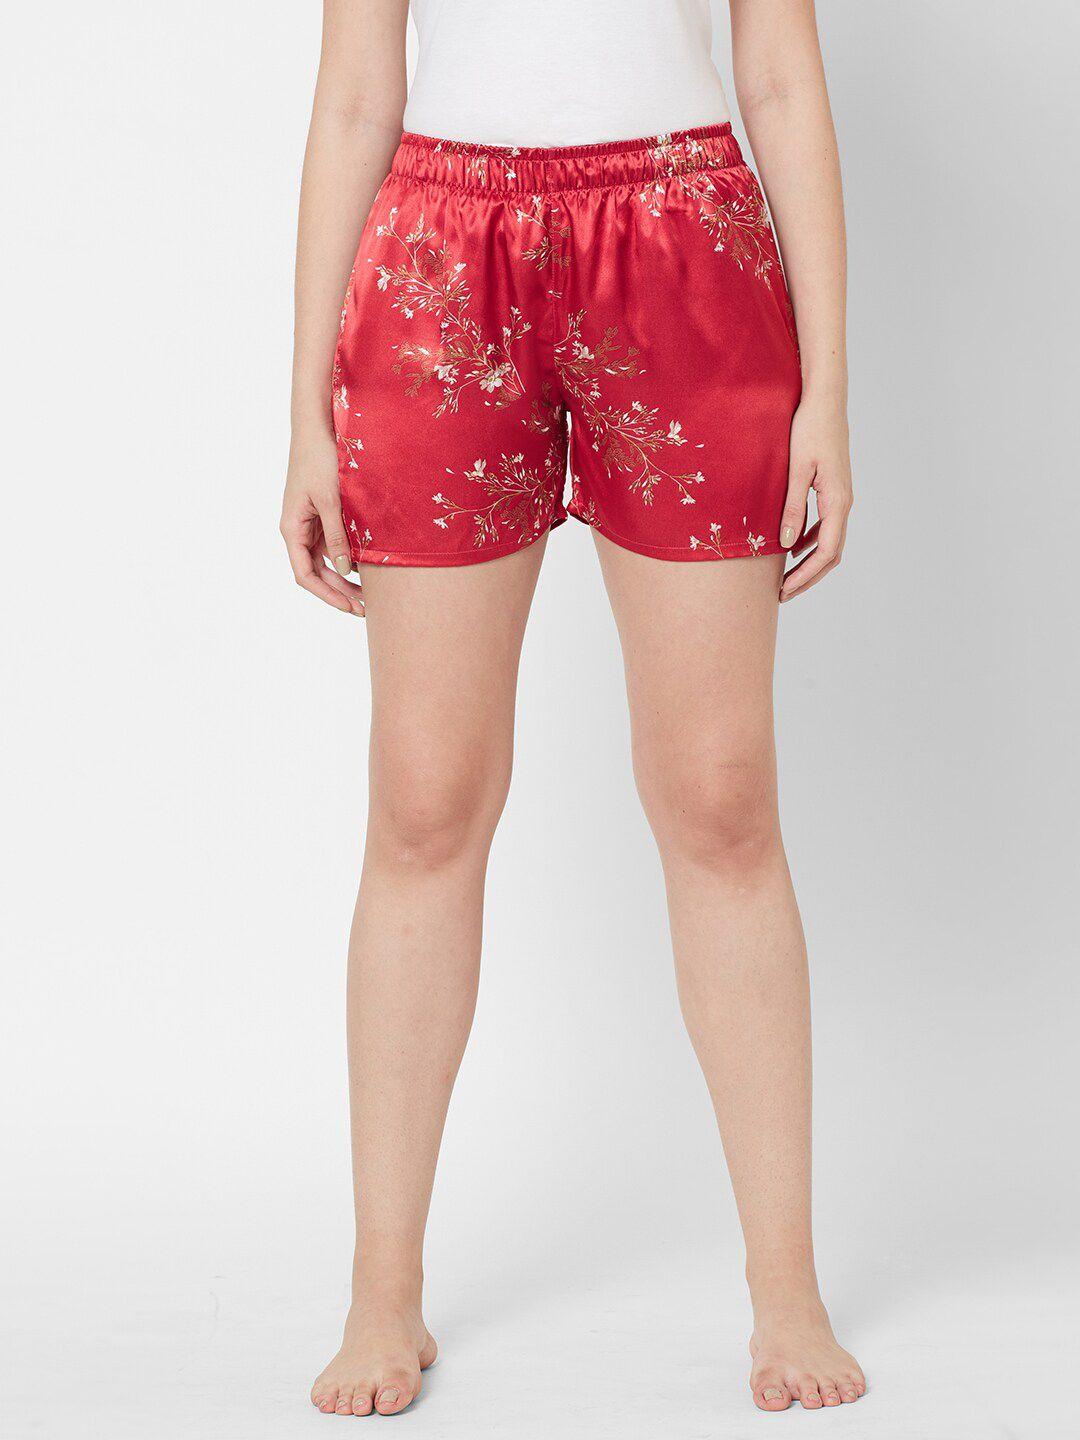 sdl-by-sweet-dreams-women-red-&-white-floral-printed-satin-lounge-shorts